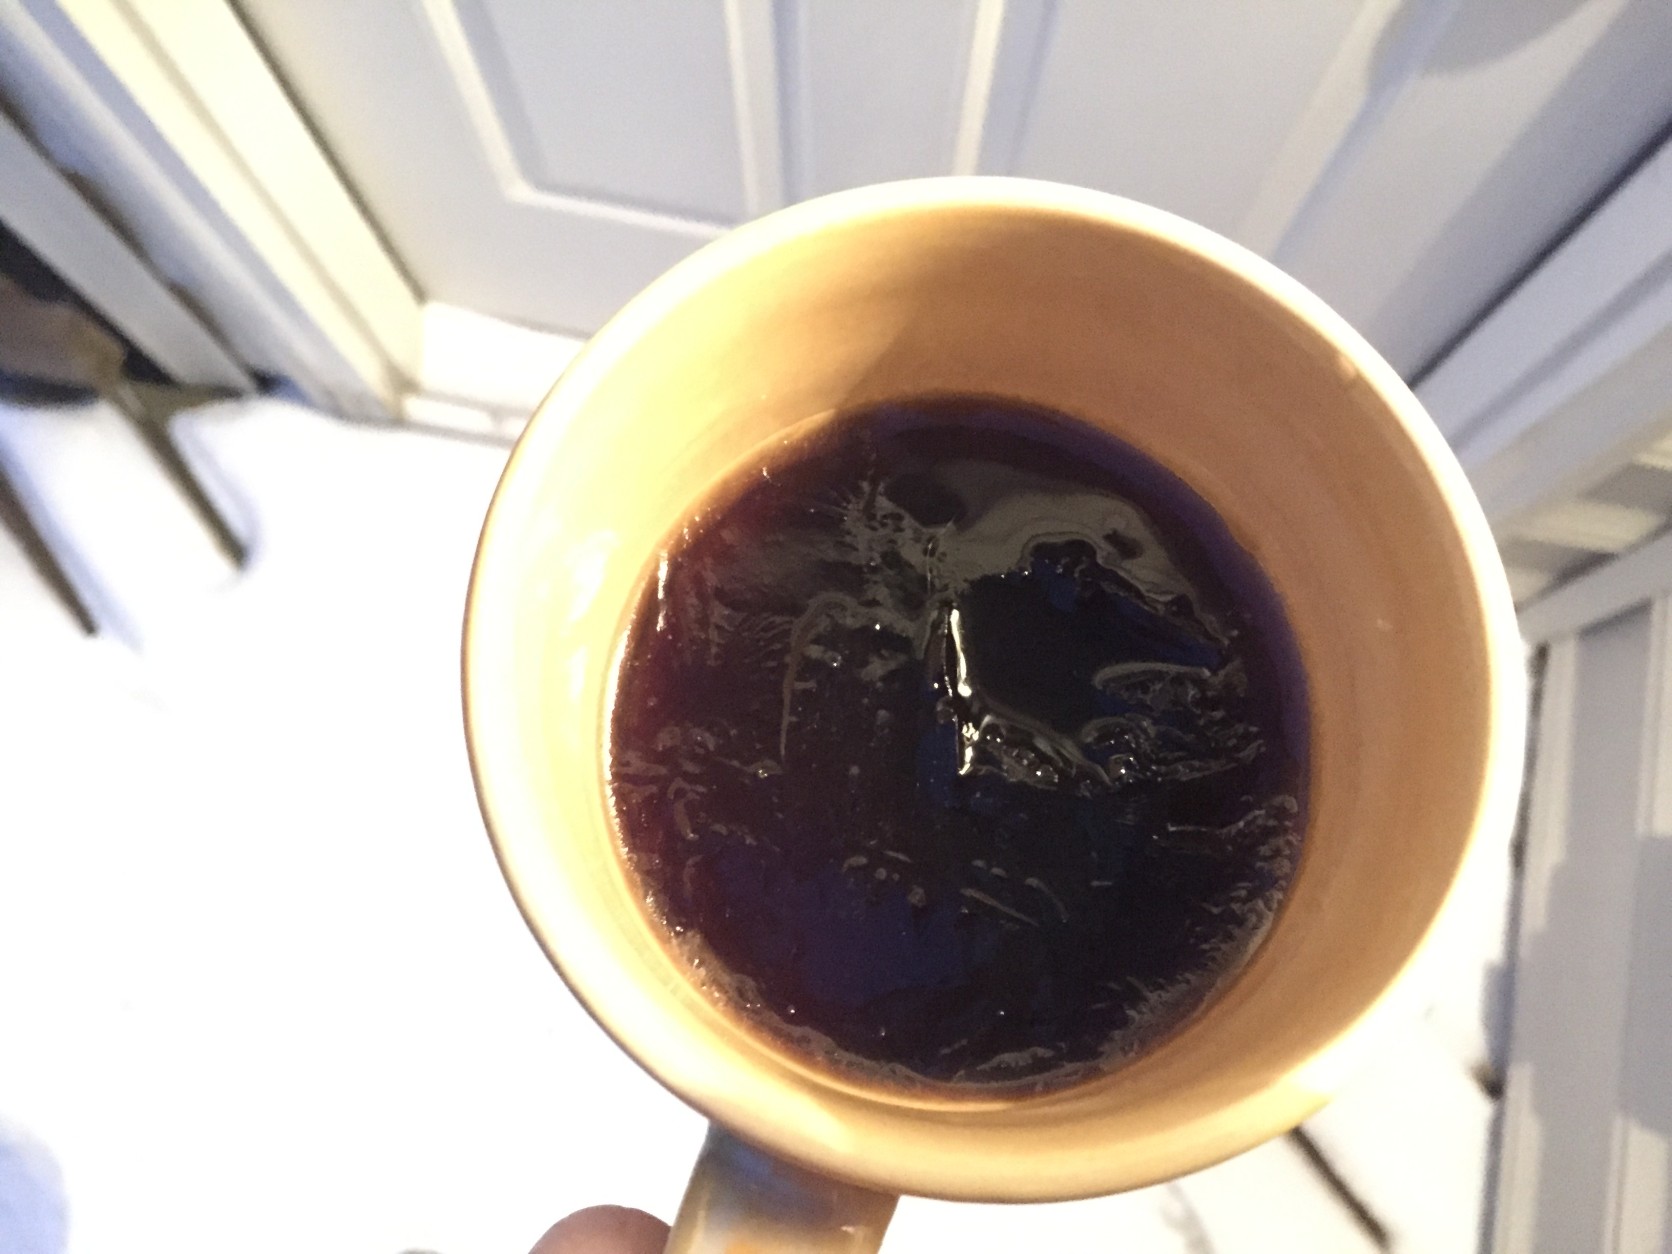 The once-steaming cup of hot black coffee has thin layer of ice, 90 minutes after being left in 10 degree weather. (WTOP/Neal Augenstein)